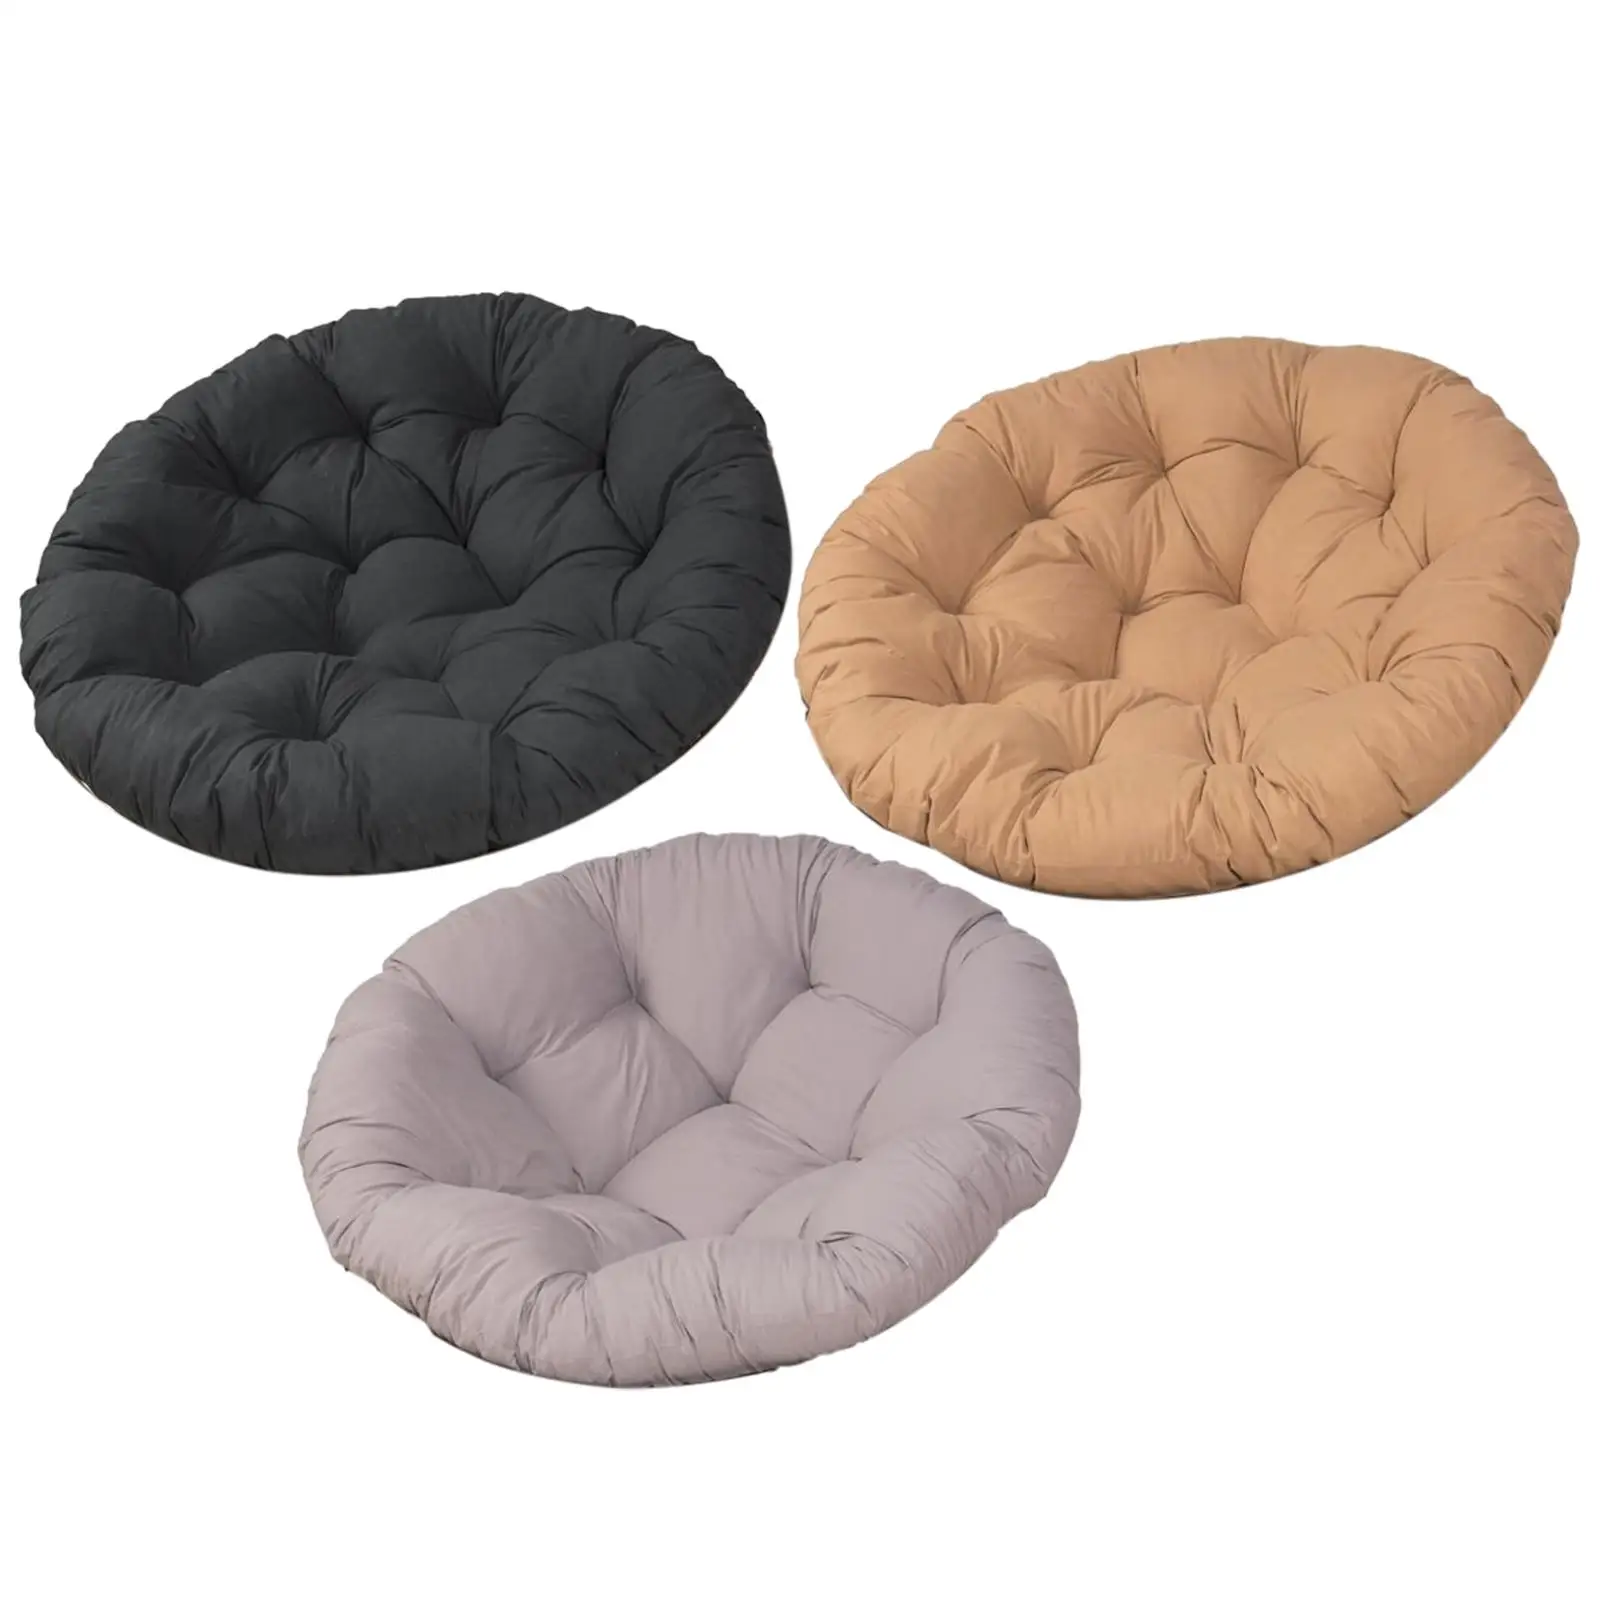 Replacement Patio Seat Cushion Chair Pads Polyester Round 24x24 inch for Garden Egg Chair